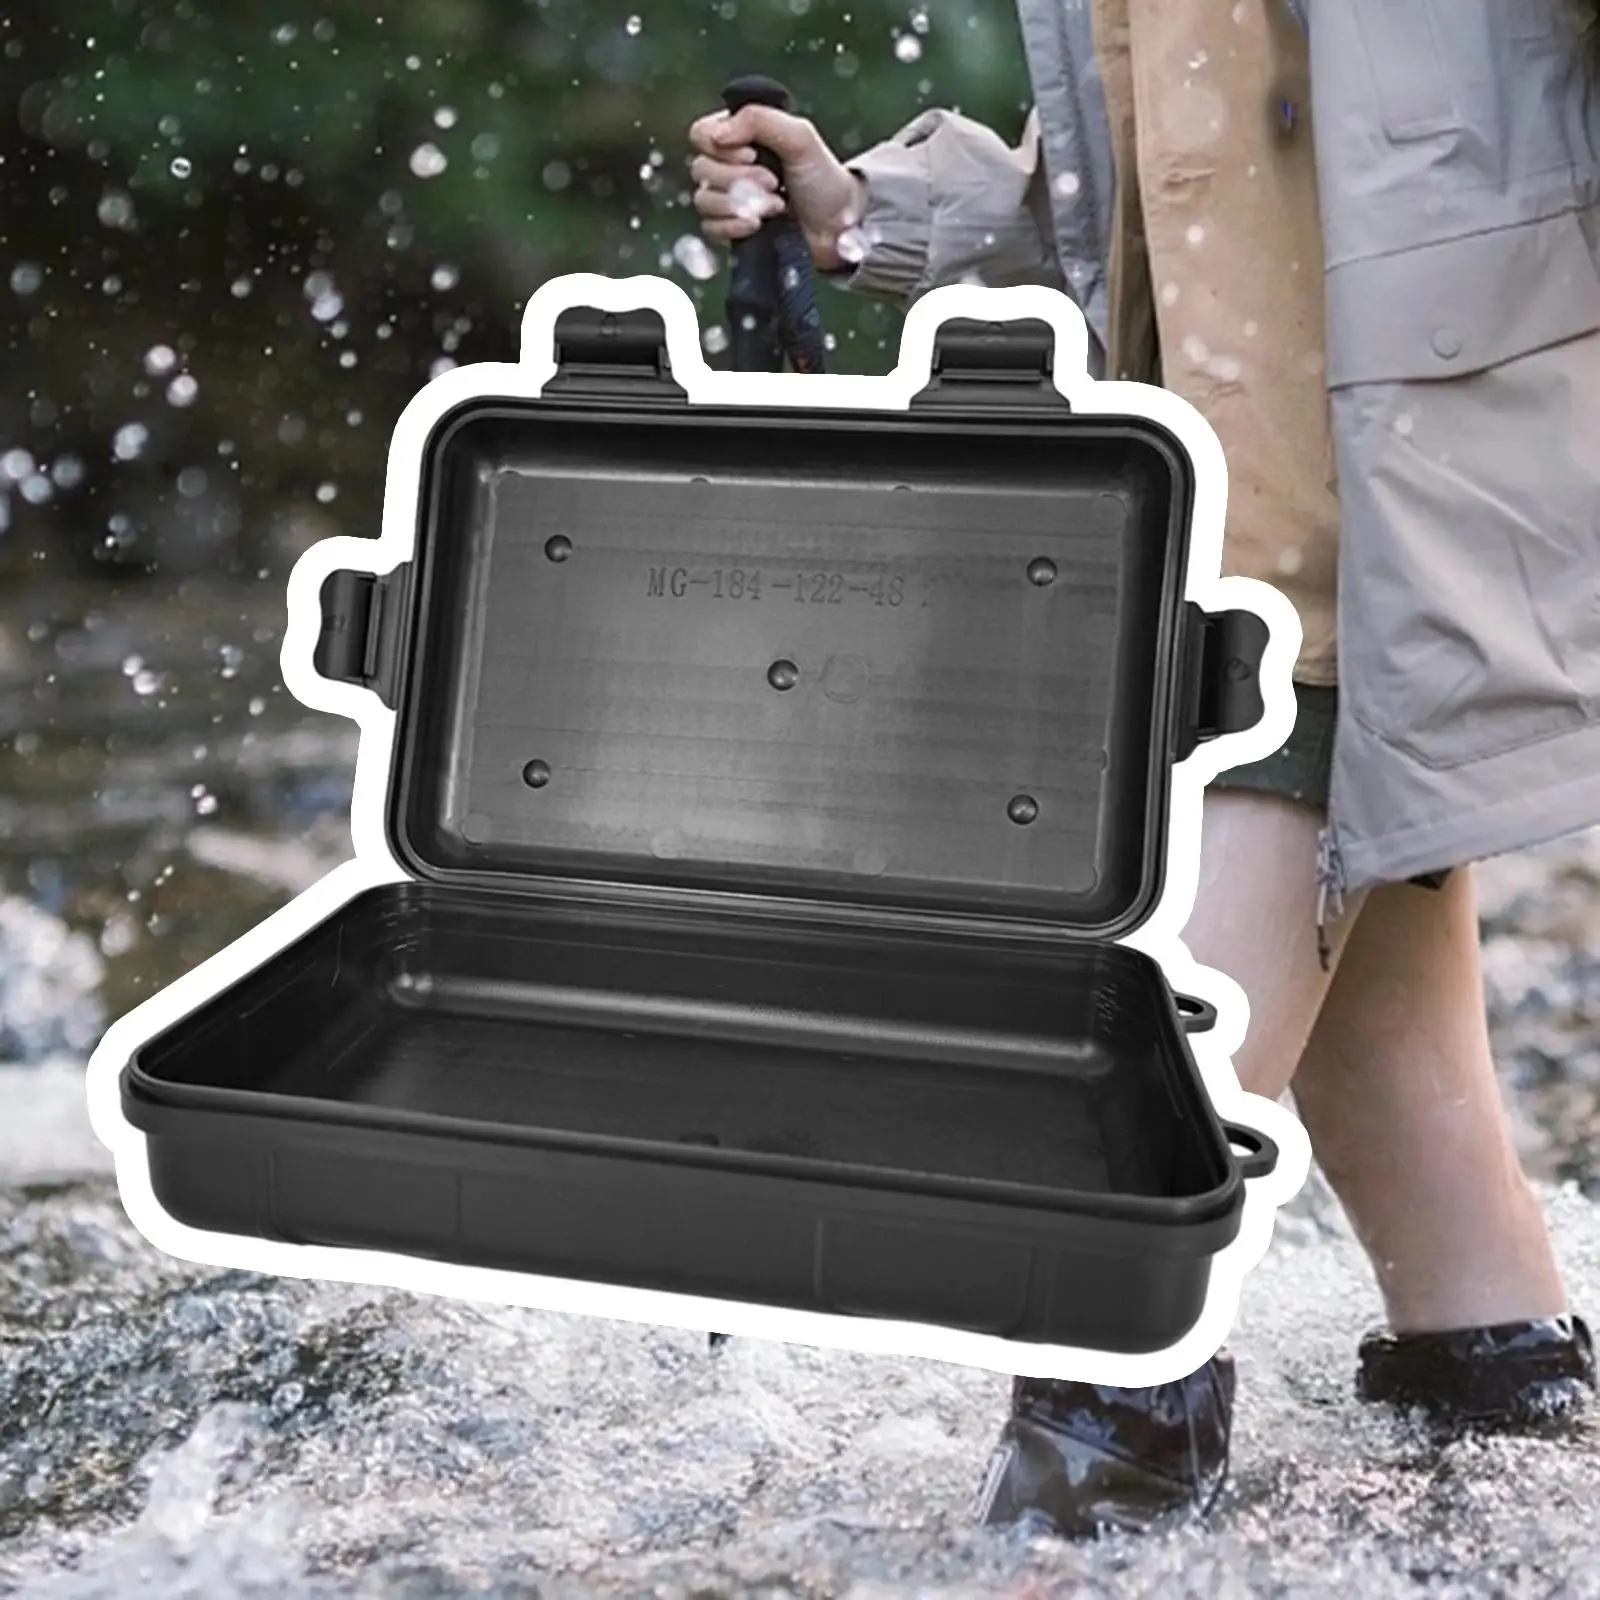 Outdoor Waterproof Storage Container Storage Box Outdoor Sealing Box Storage Airtight Case for Hiking Outdoor Activities Camping